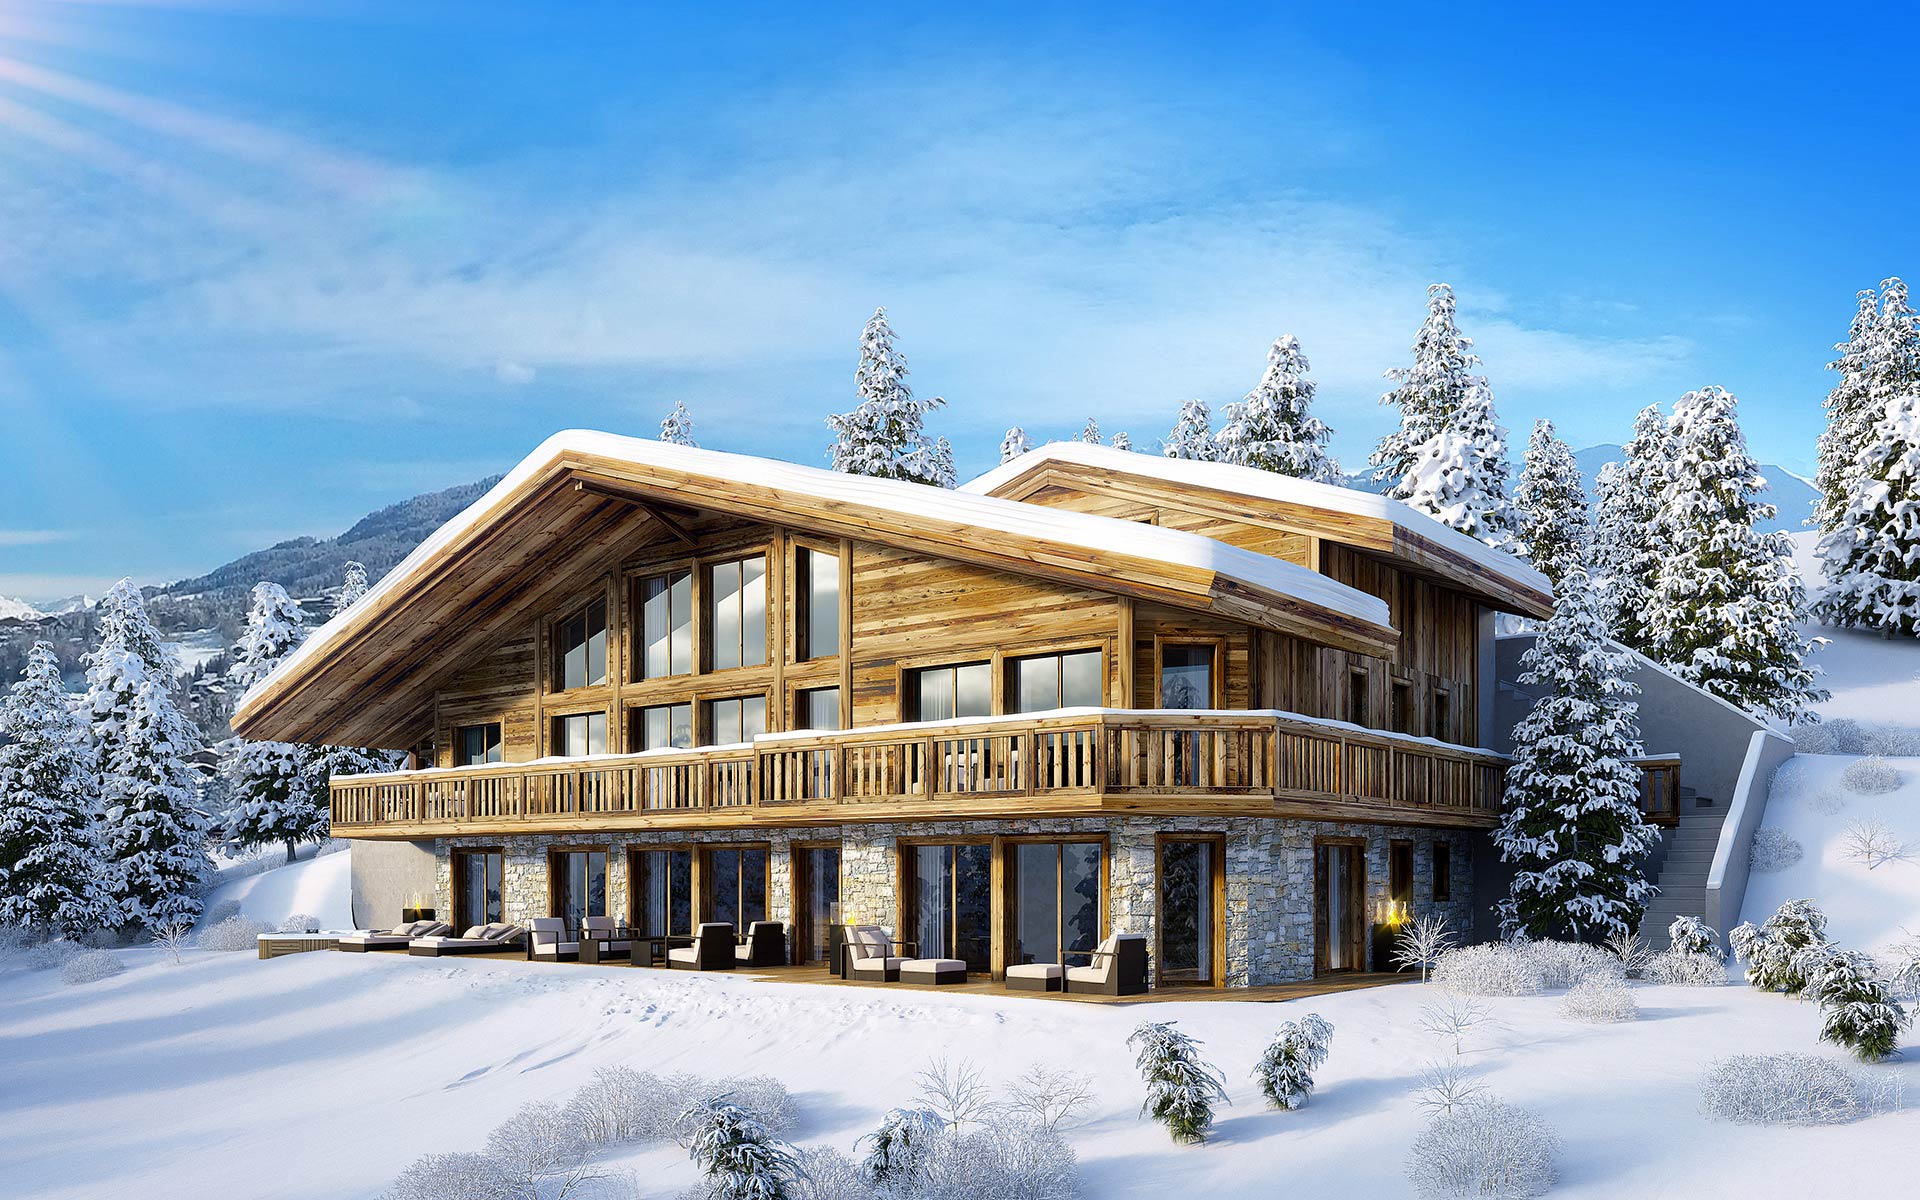 3D image of the exterior of a chalet in Courchevel